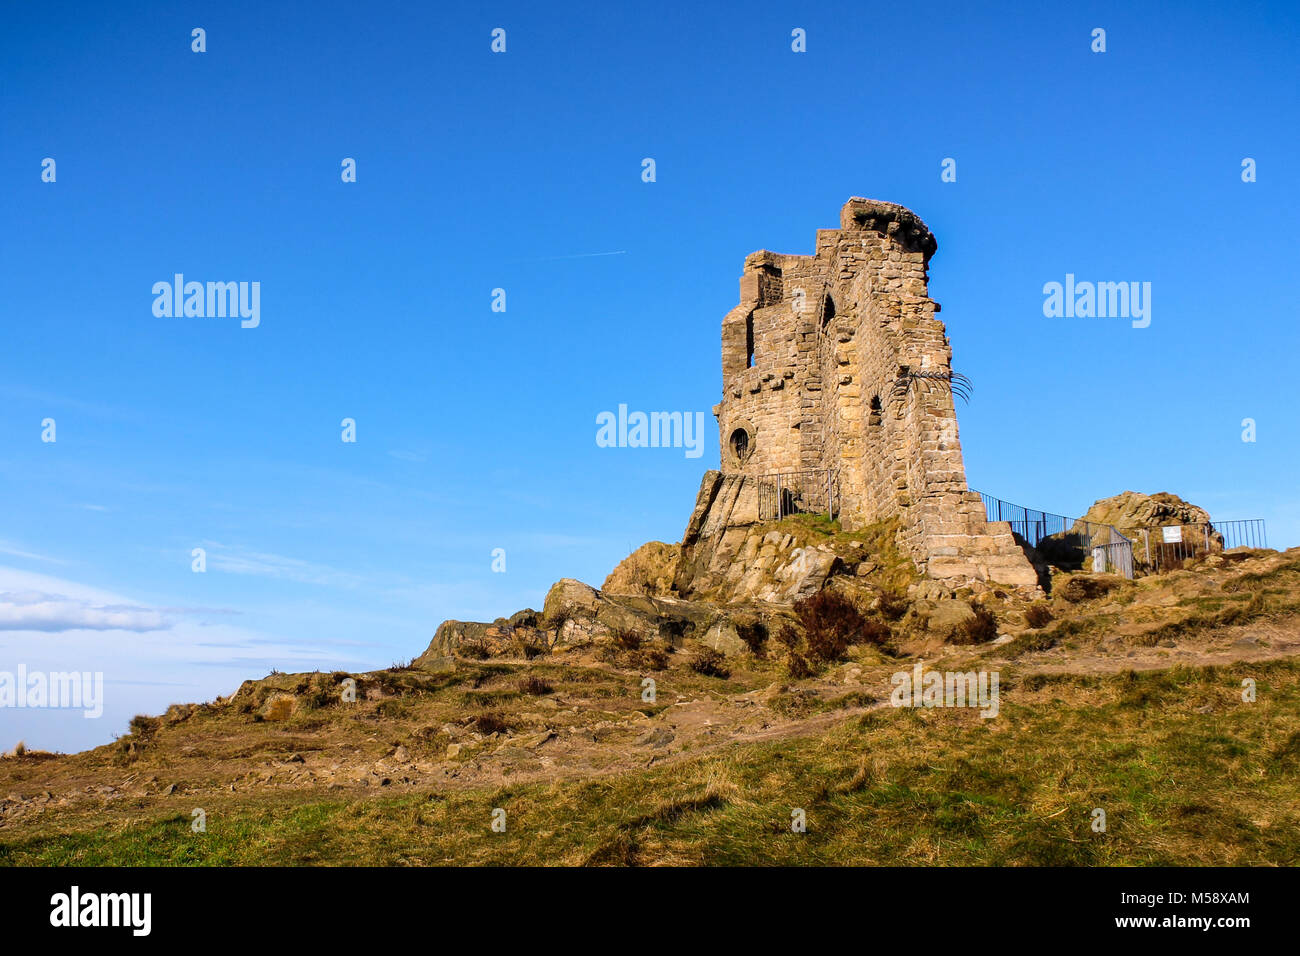 The ruins of the medieval tower of Mow Cop, in Cheshire United Kingdom. Stock Photo